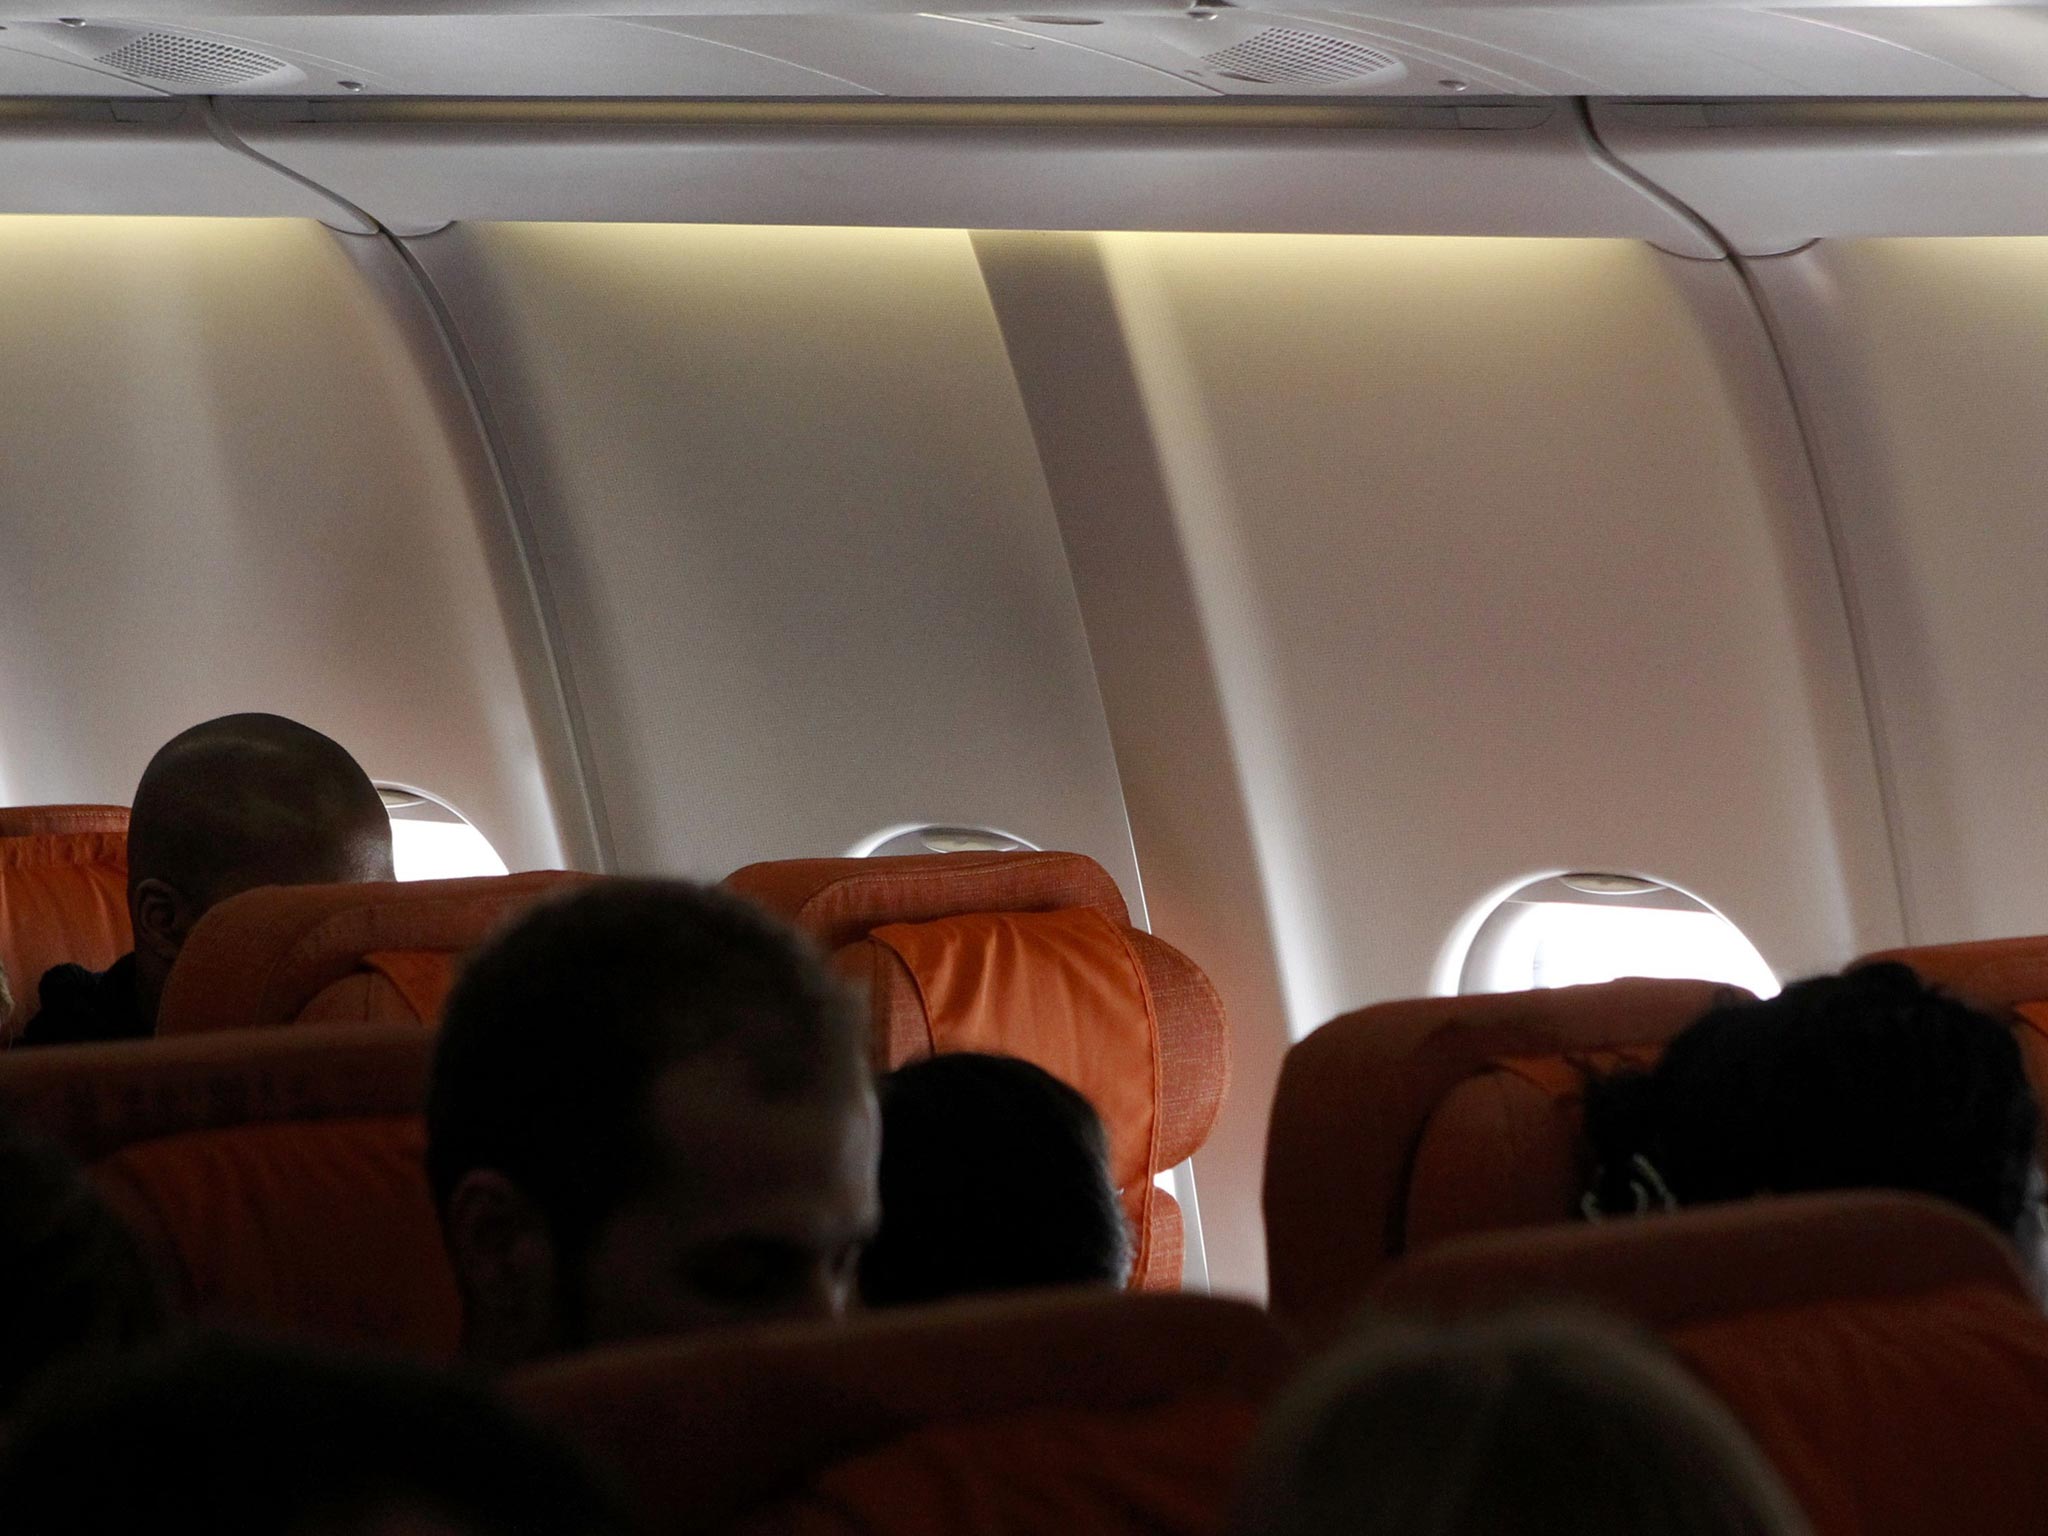 An empty passenger seat believed to be reserved by former U.S. spy agency contractor Edward Snowden is seen on a plane to Cuba in Moscow's Sheremetyevo airport